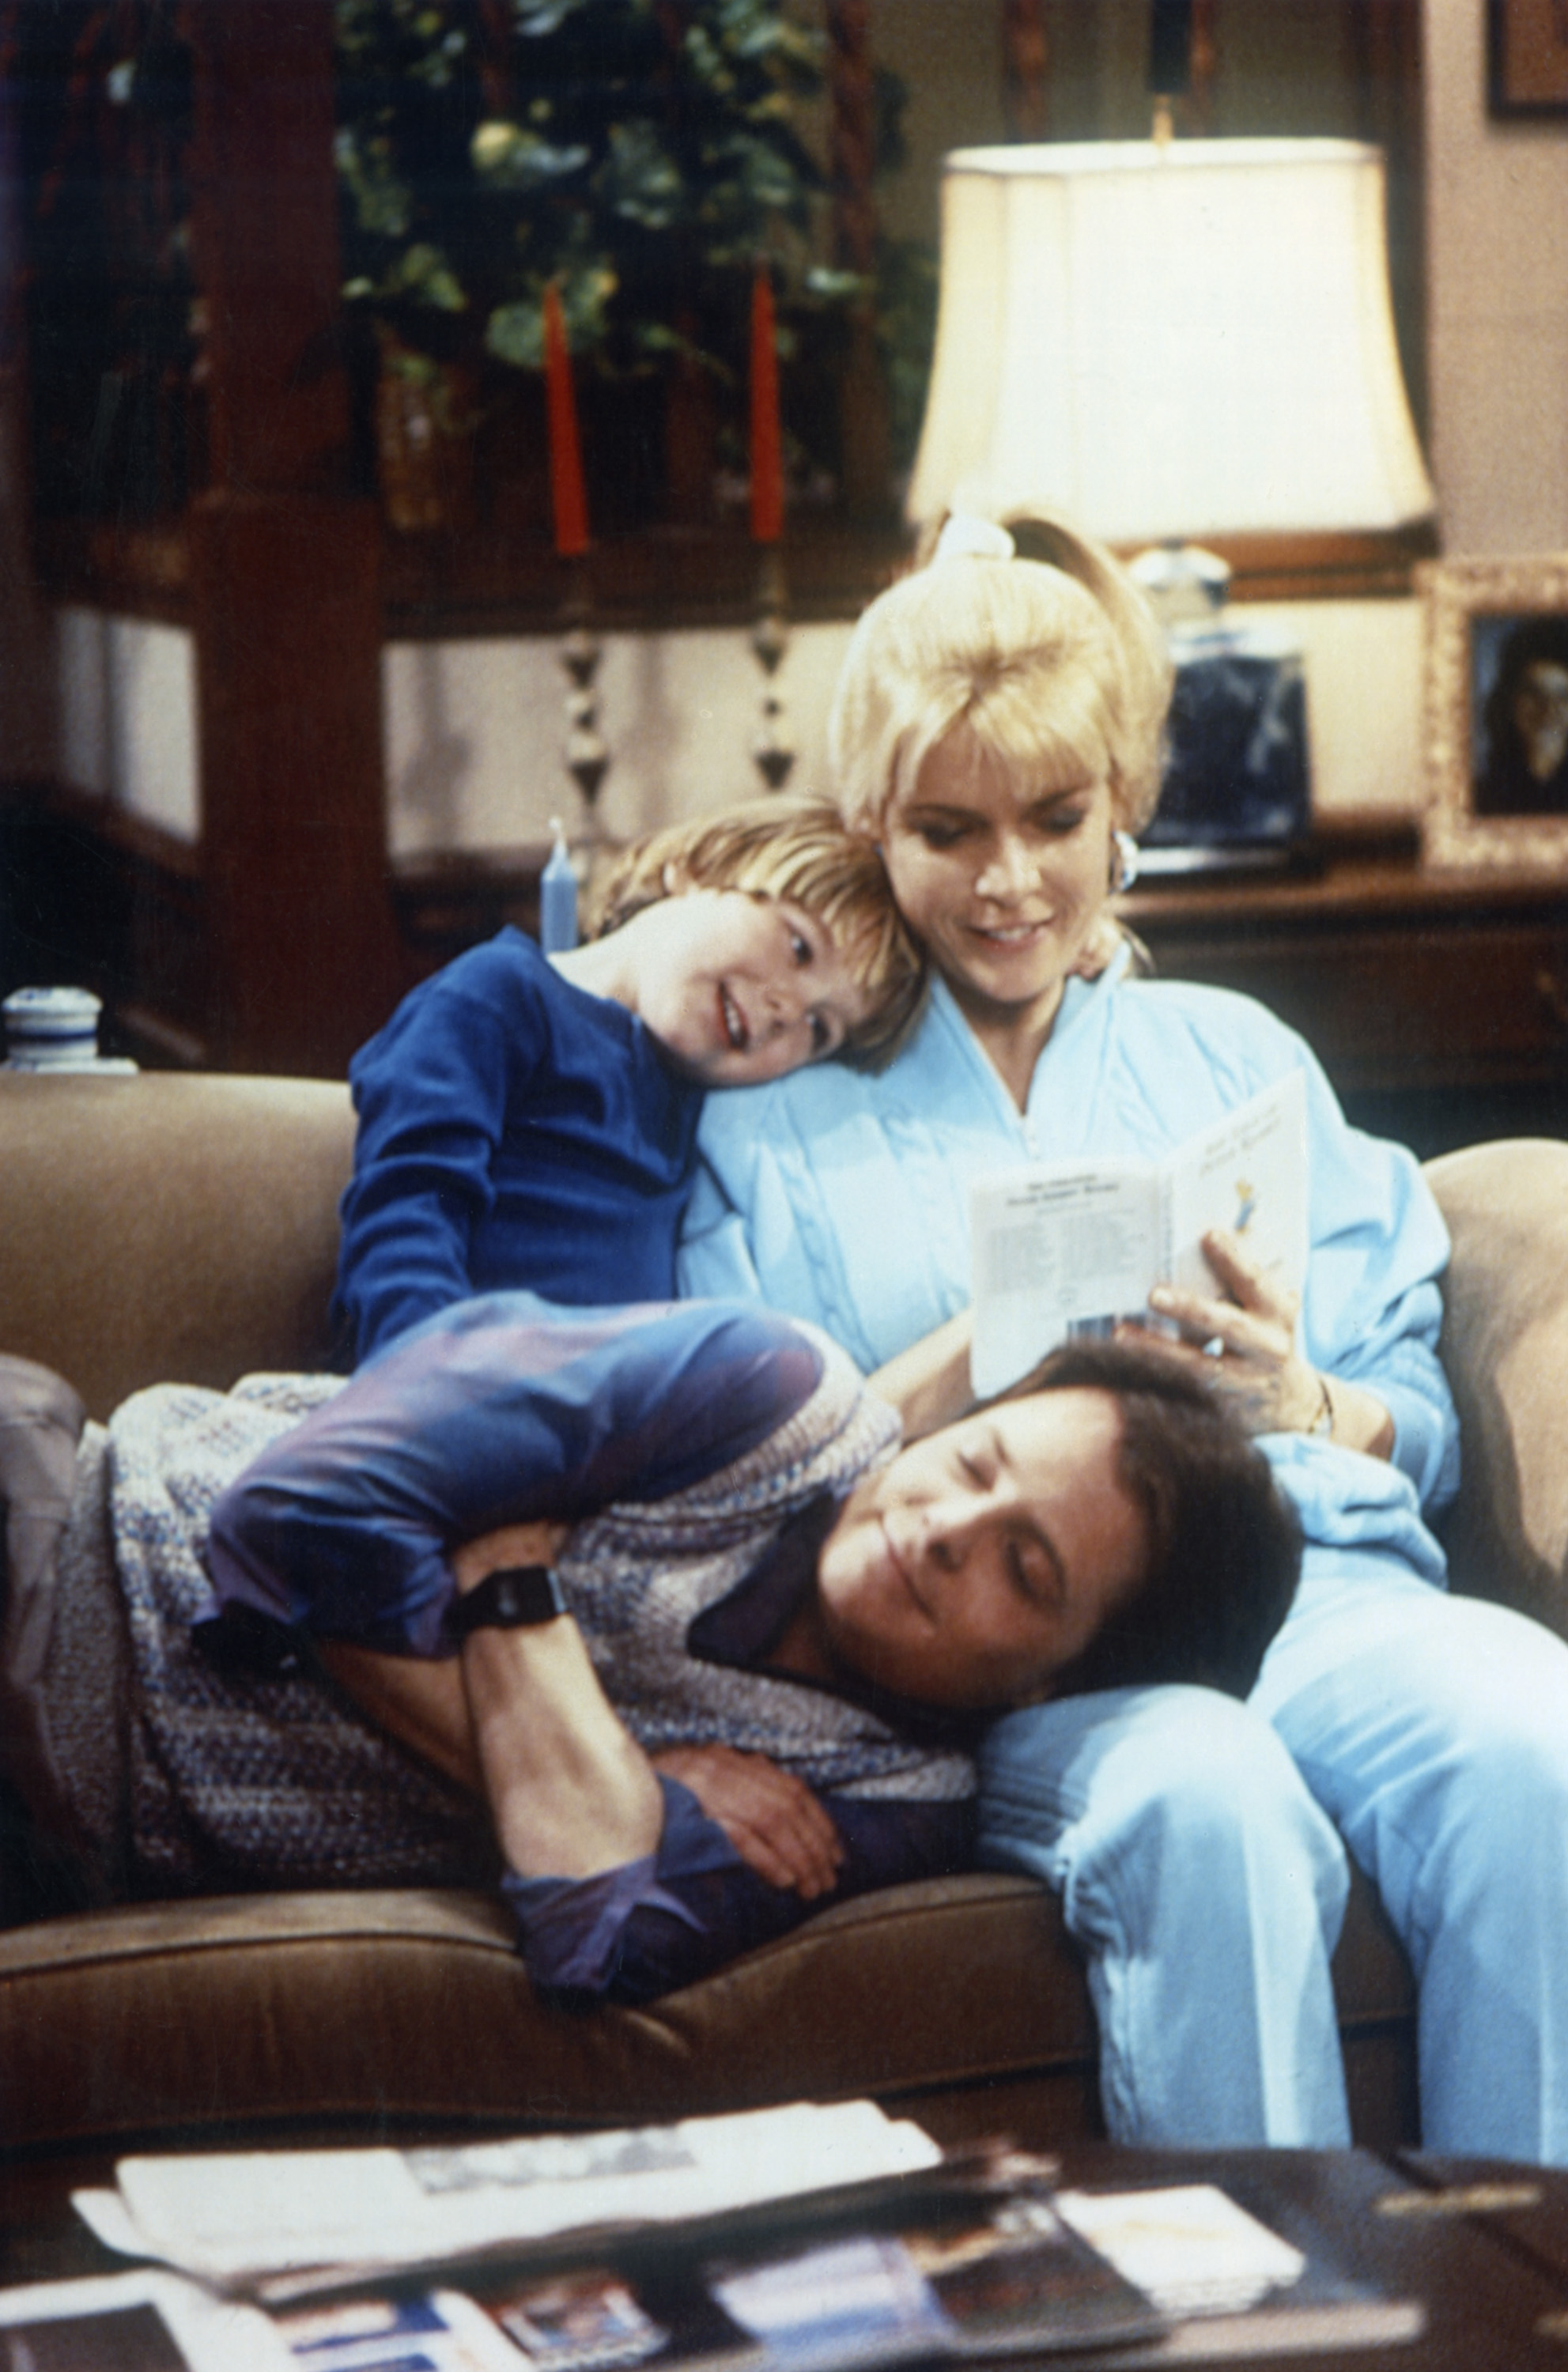  Brian Bonsall as Andrew 'Andy' Keaton, Michael J. Fox as Alex P. Keaton, Meredith Baxter as Elyse Keaton in "Family Ties" circa 1980 | Source: Getty Images